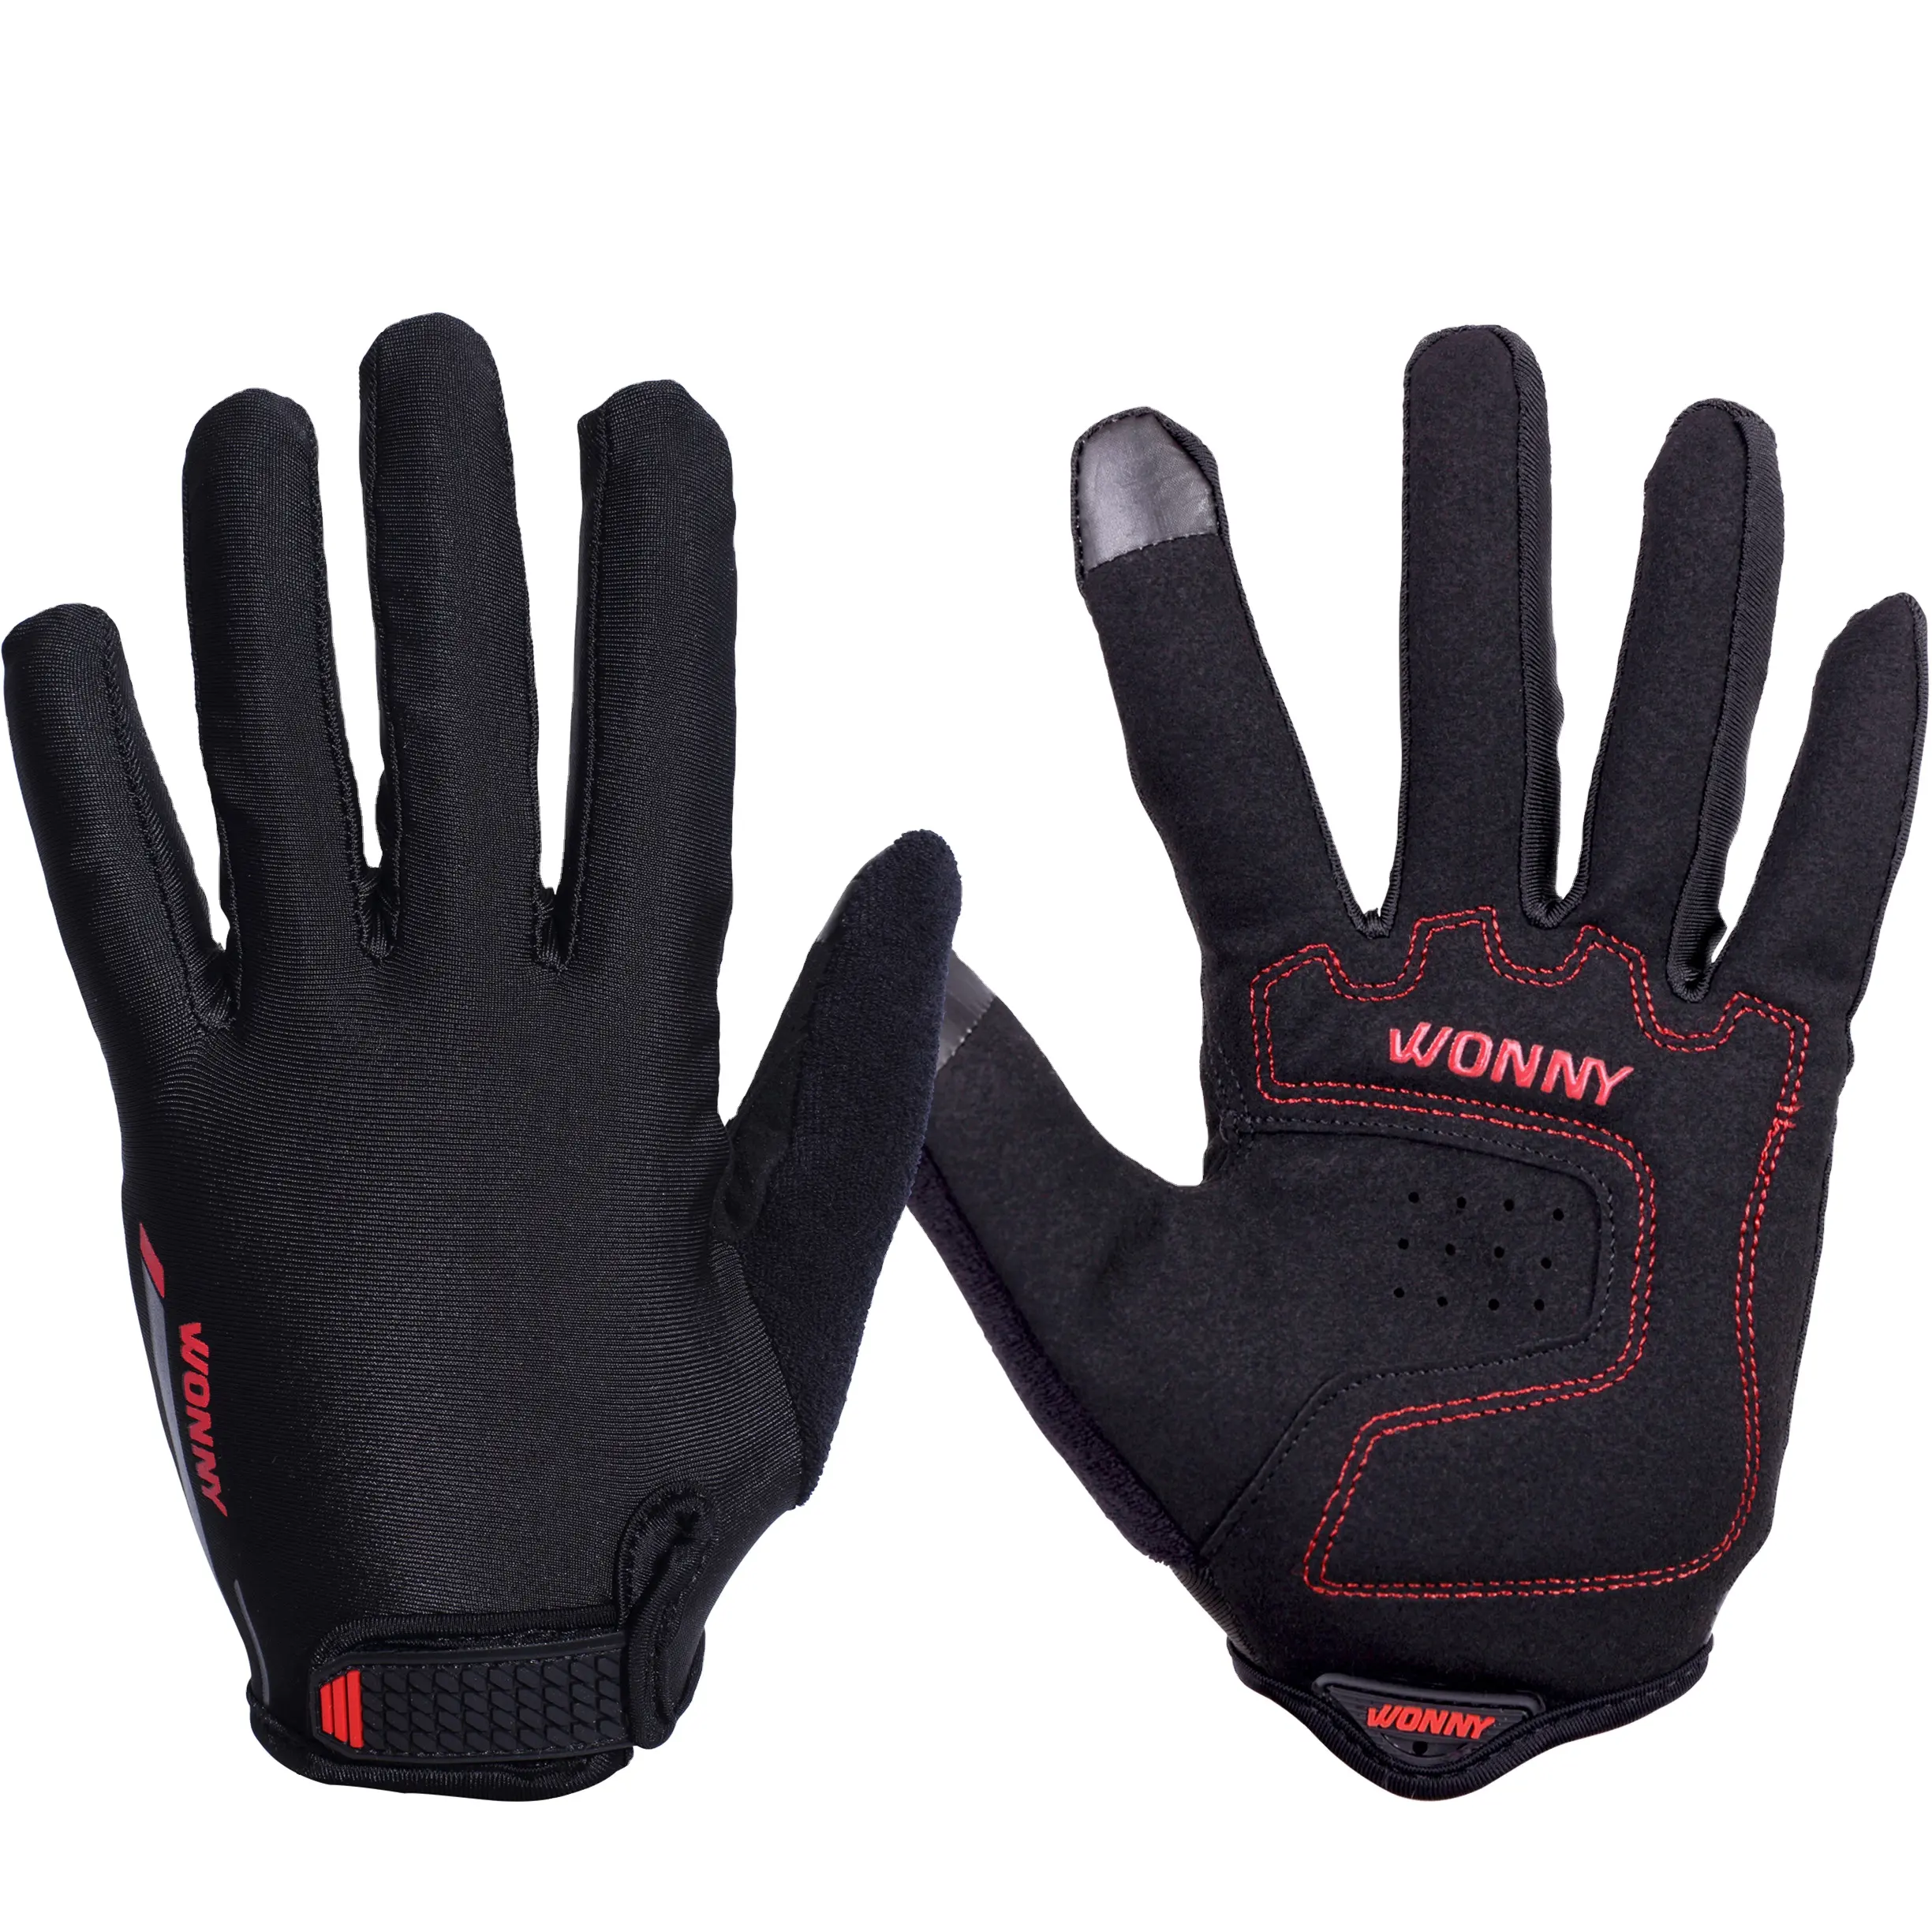 Windproof waterproof comfortable anti slip cycling gloves for riding gloves bike motorcycle gloves